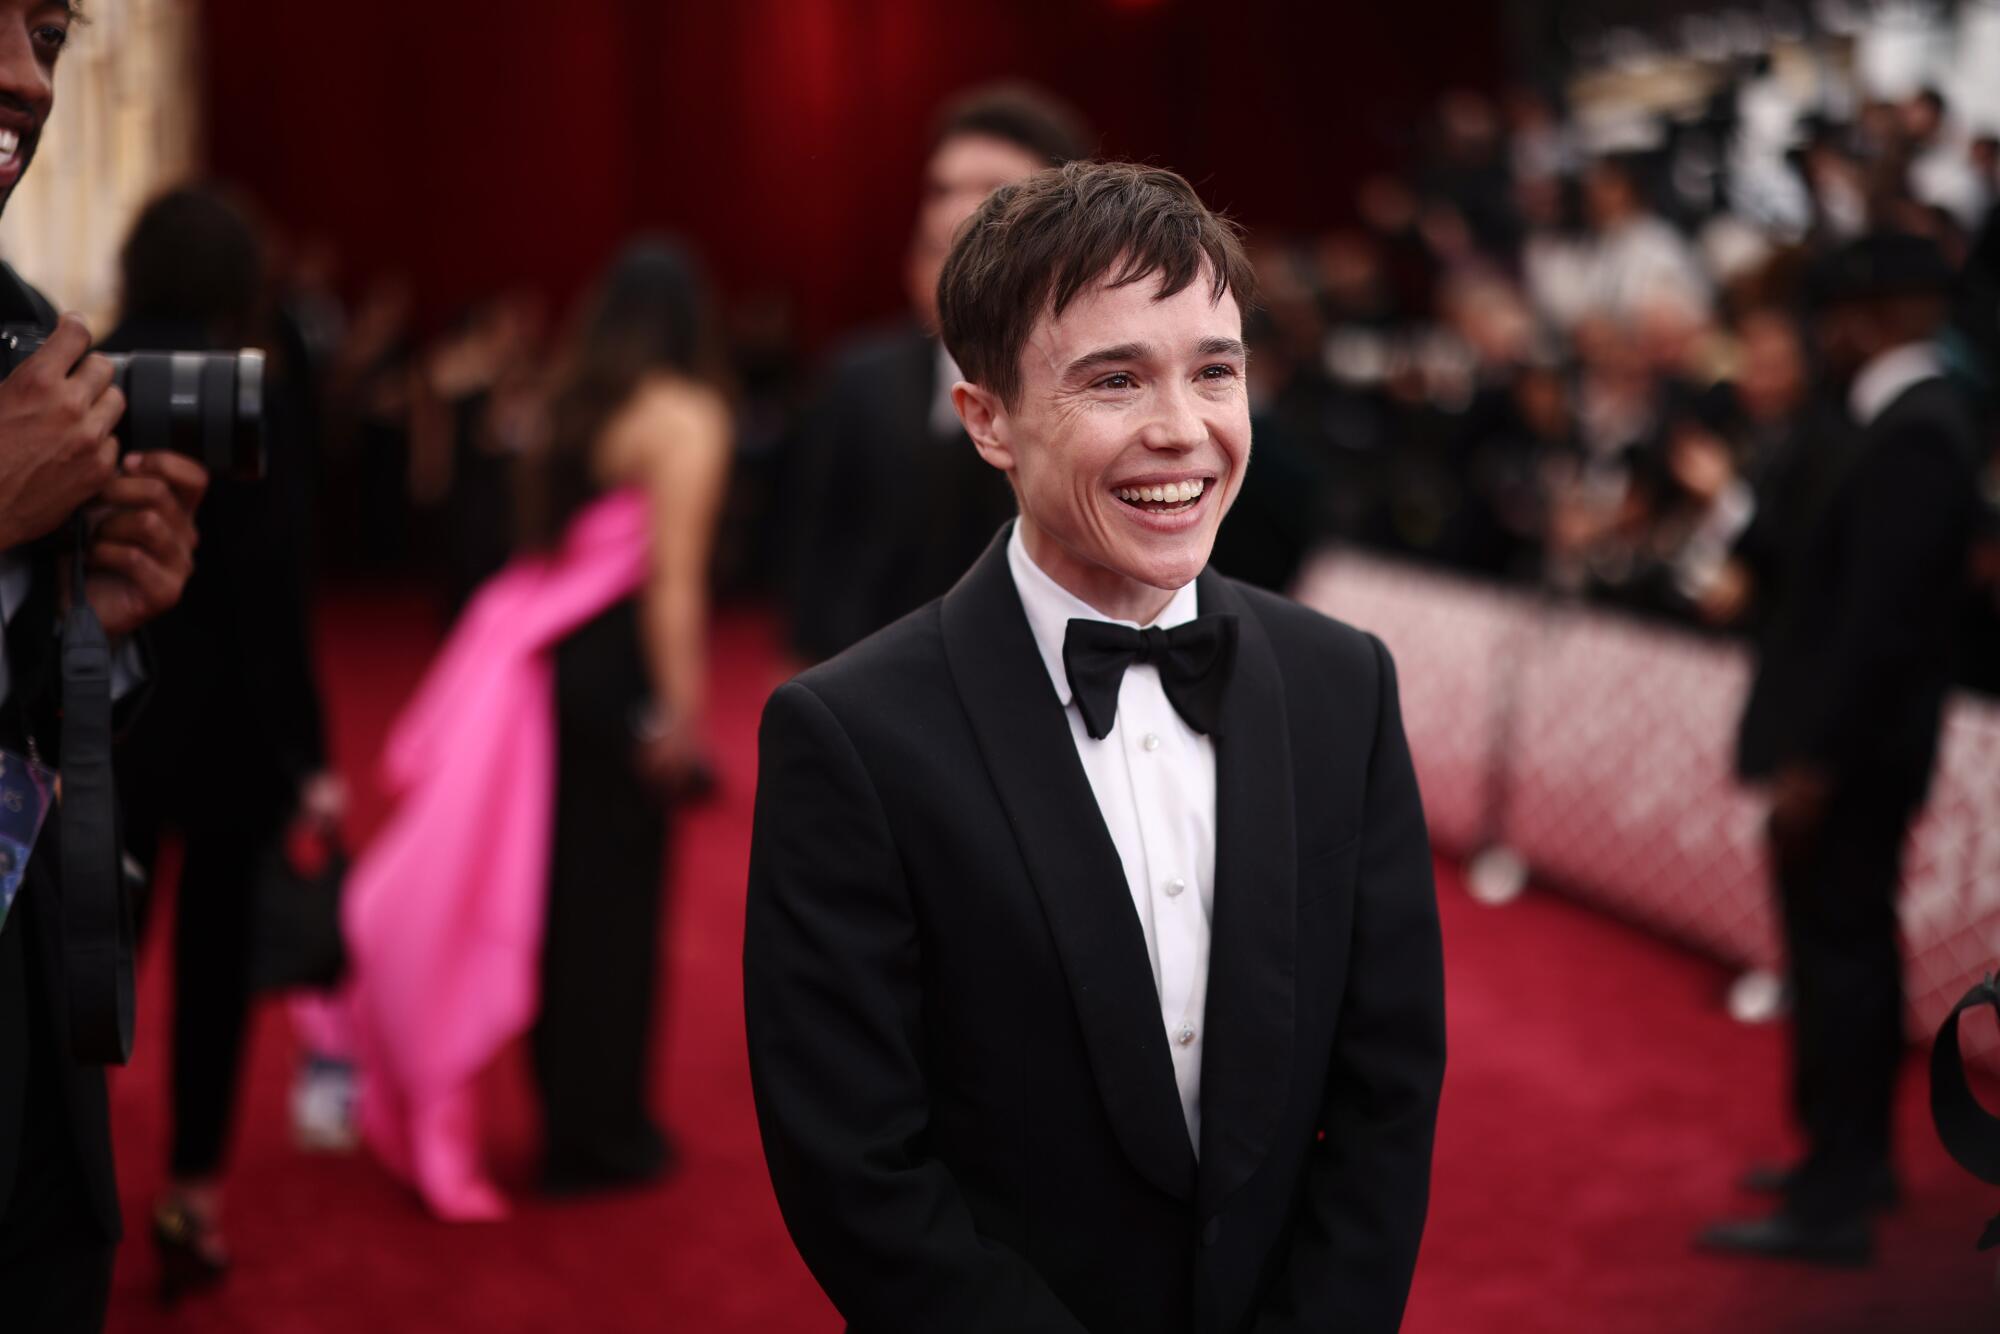 Elliot Page in a tuxedo smiles on a red carpet